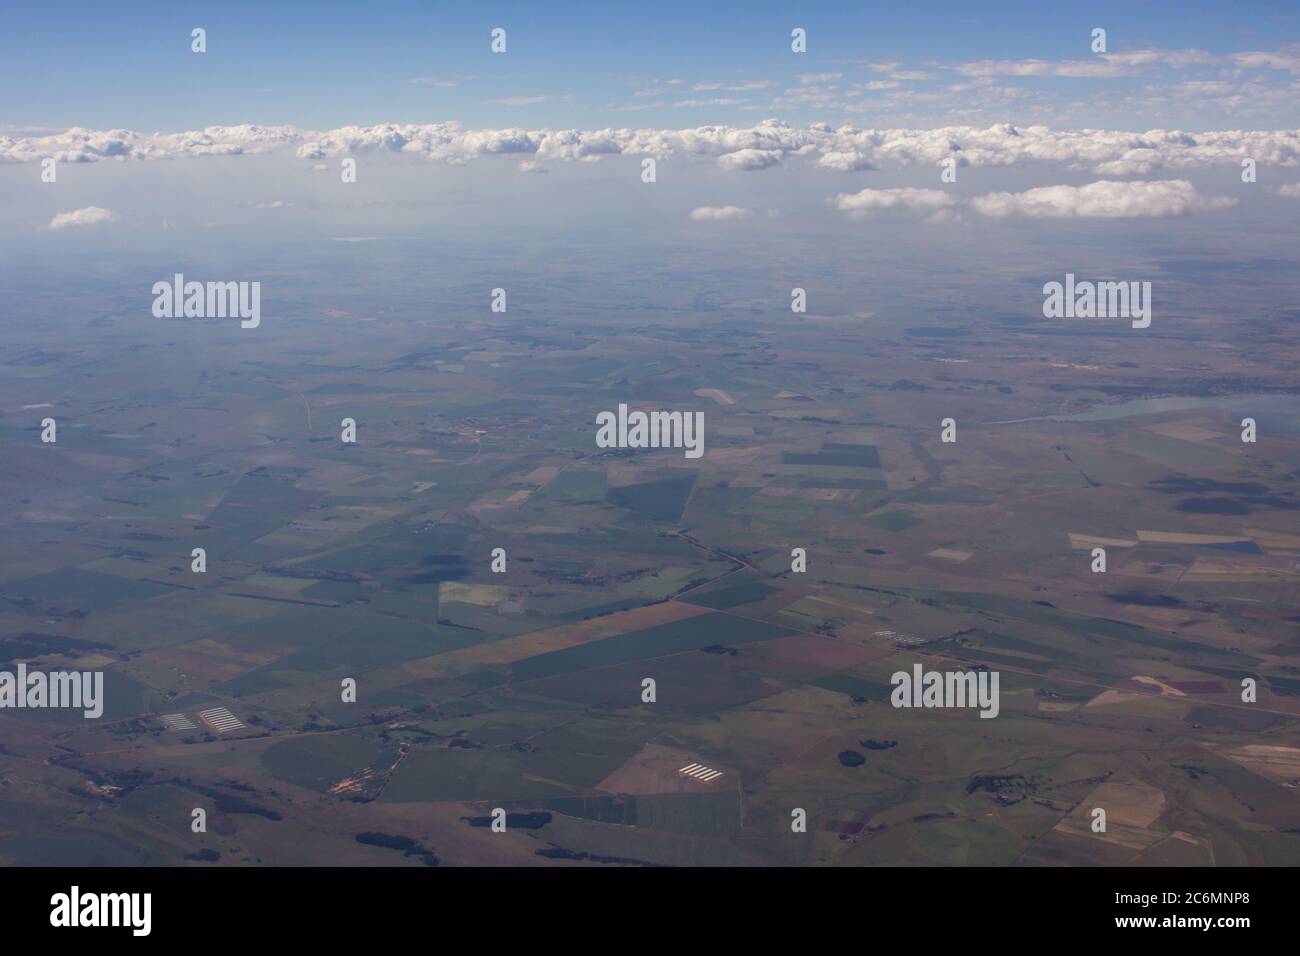 Farmlands, at different times in growing season, of the Highveld of South Africa as seen from an Aeroplane Stock Photo